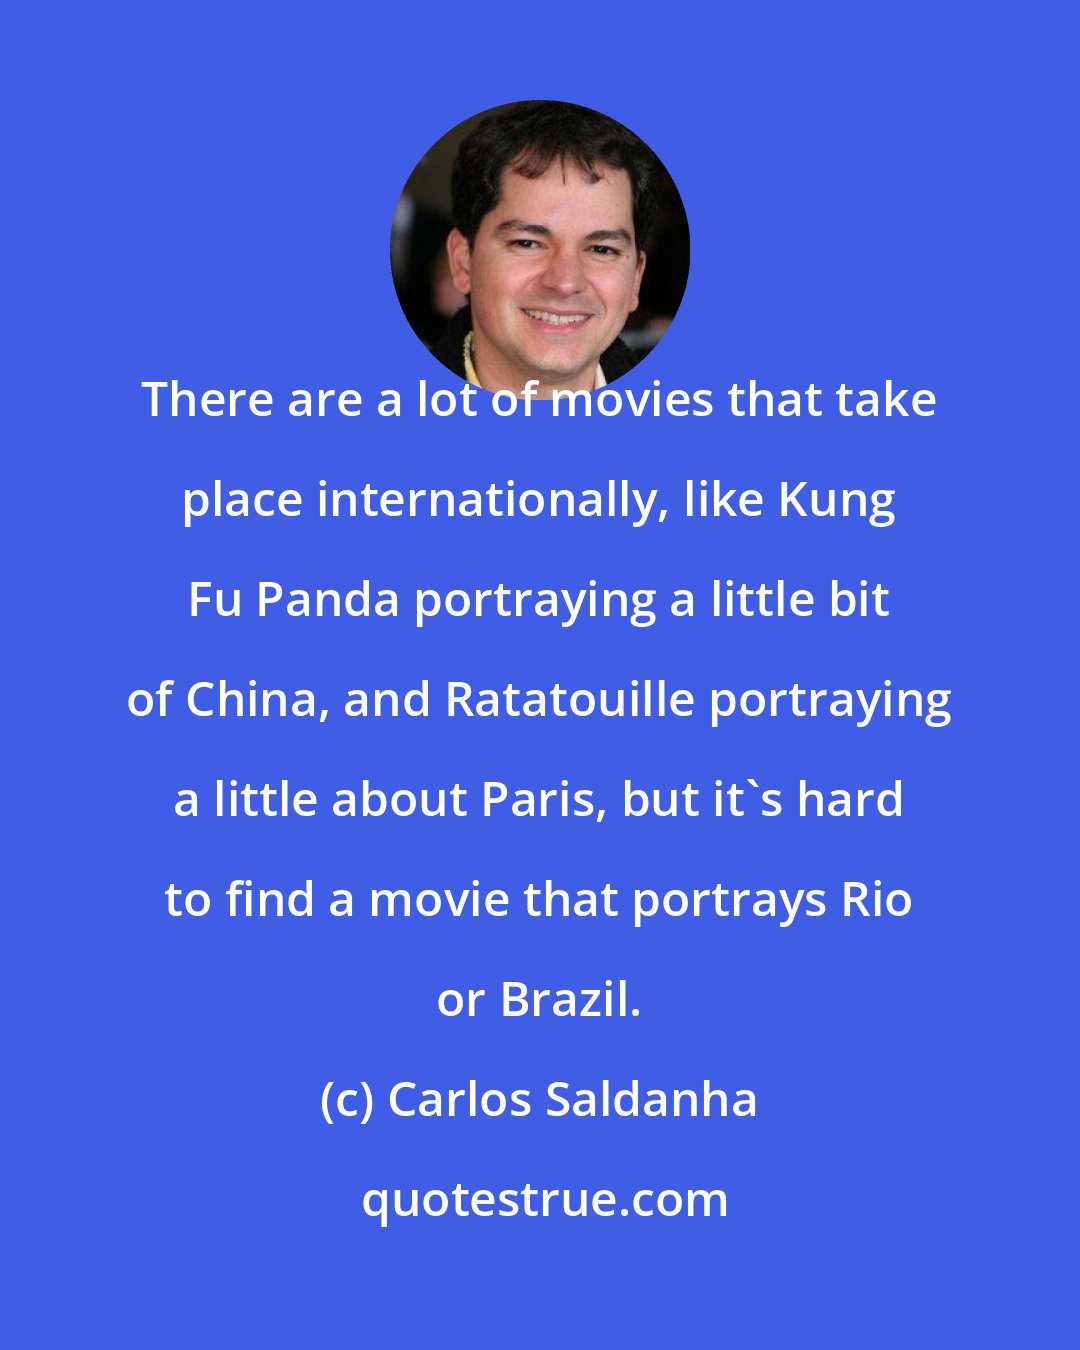 Carlos Saldanha: There are a lot of movies that take place internationally, like Kung Fu Panda portraying a little bit of China, and Ratatouille portraying a little about Paris, but it's hard to find a movie that portrays Rio or Brazil.